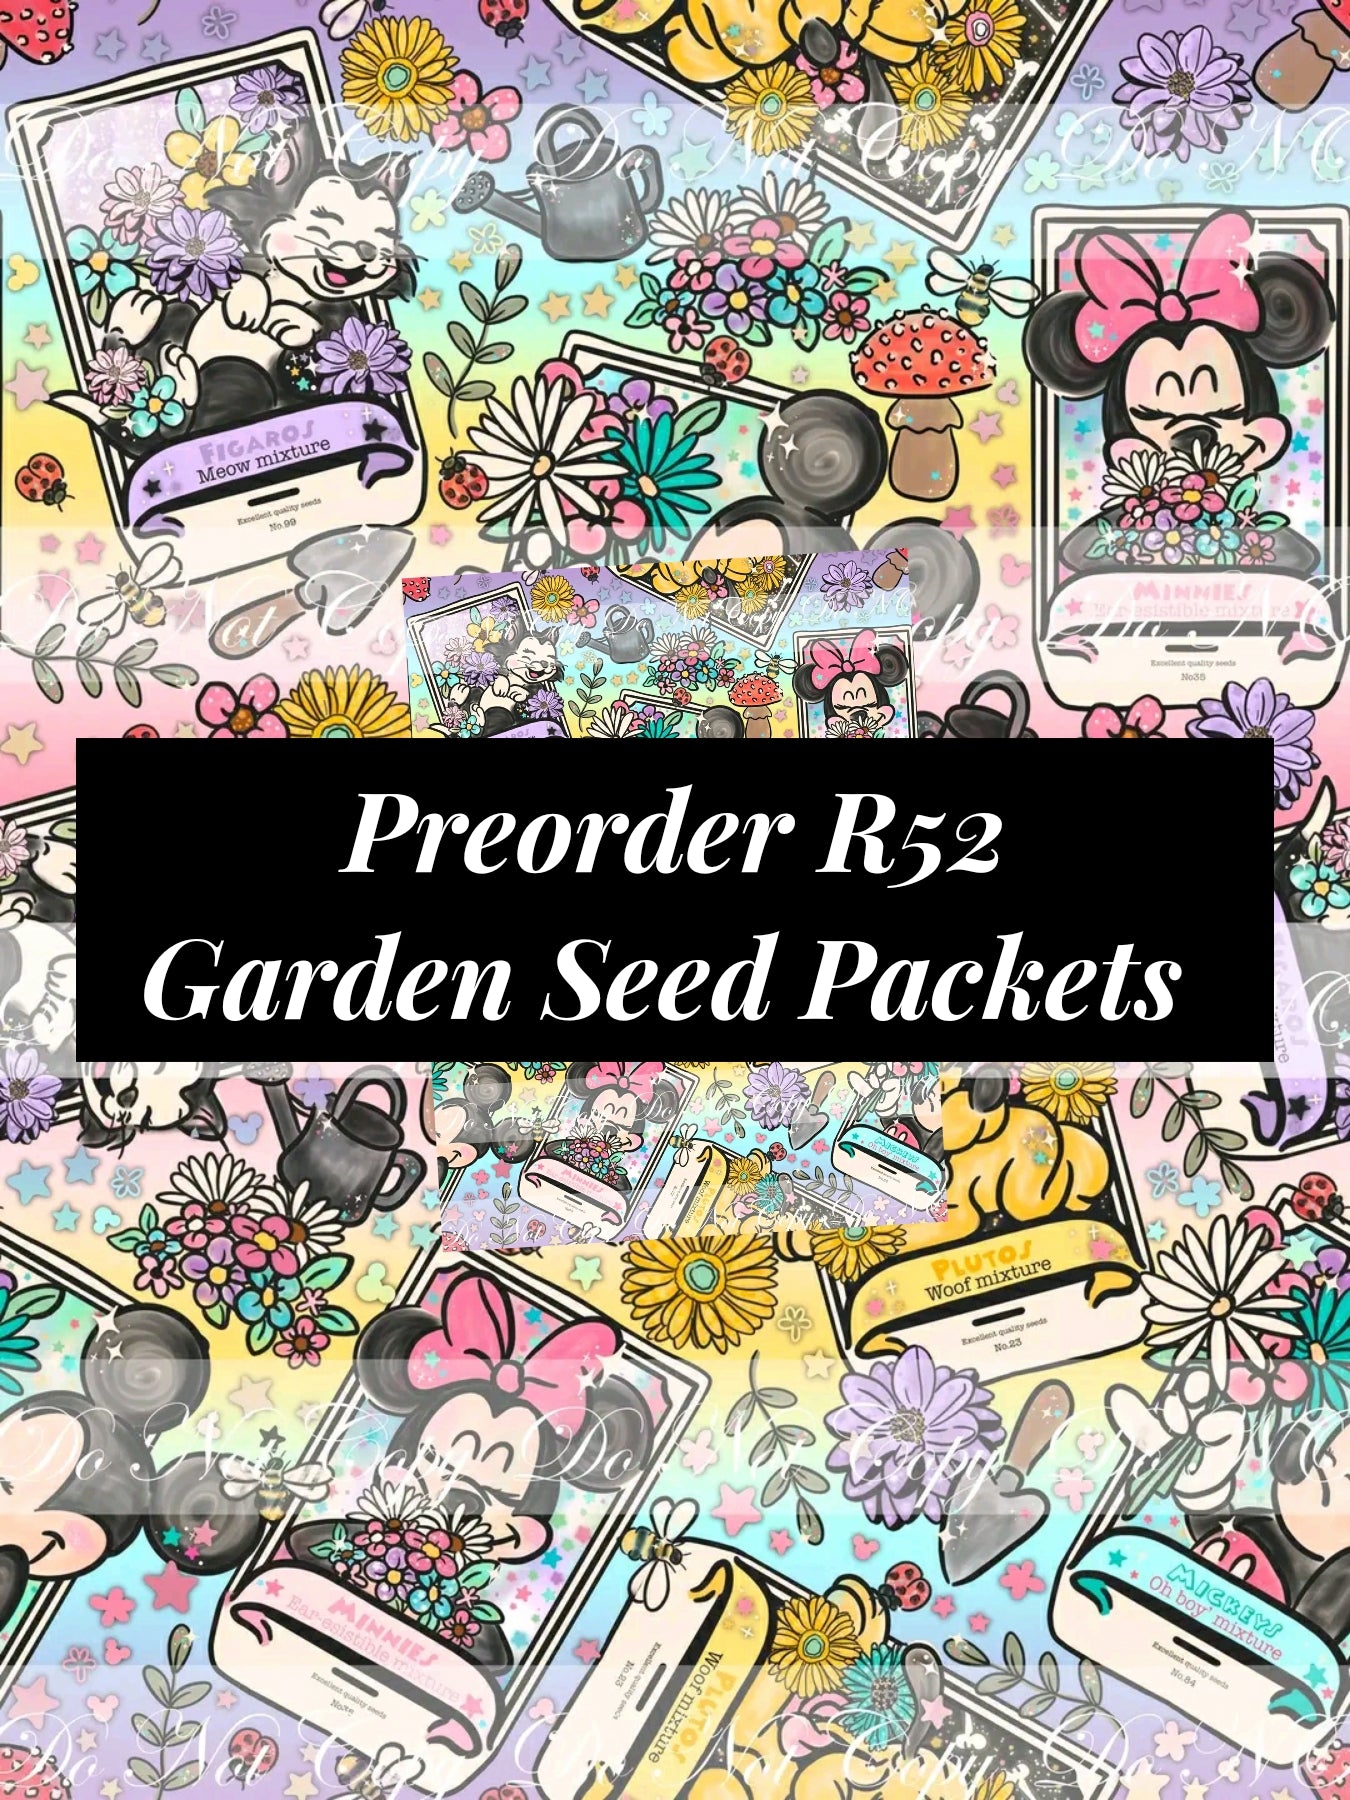 Preorder R52 Garden Seed Packets